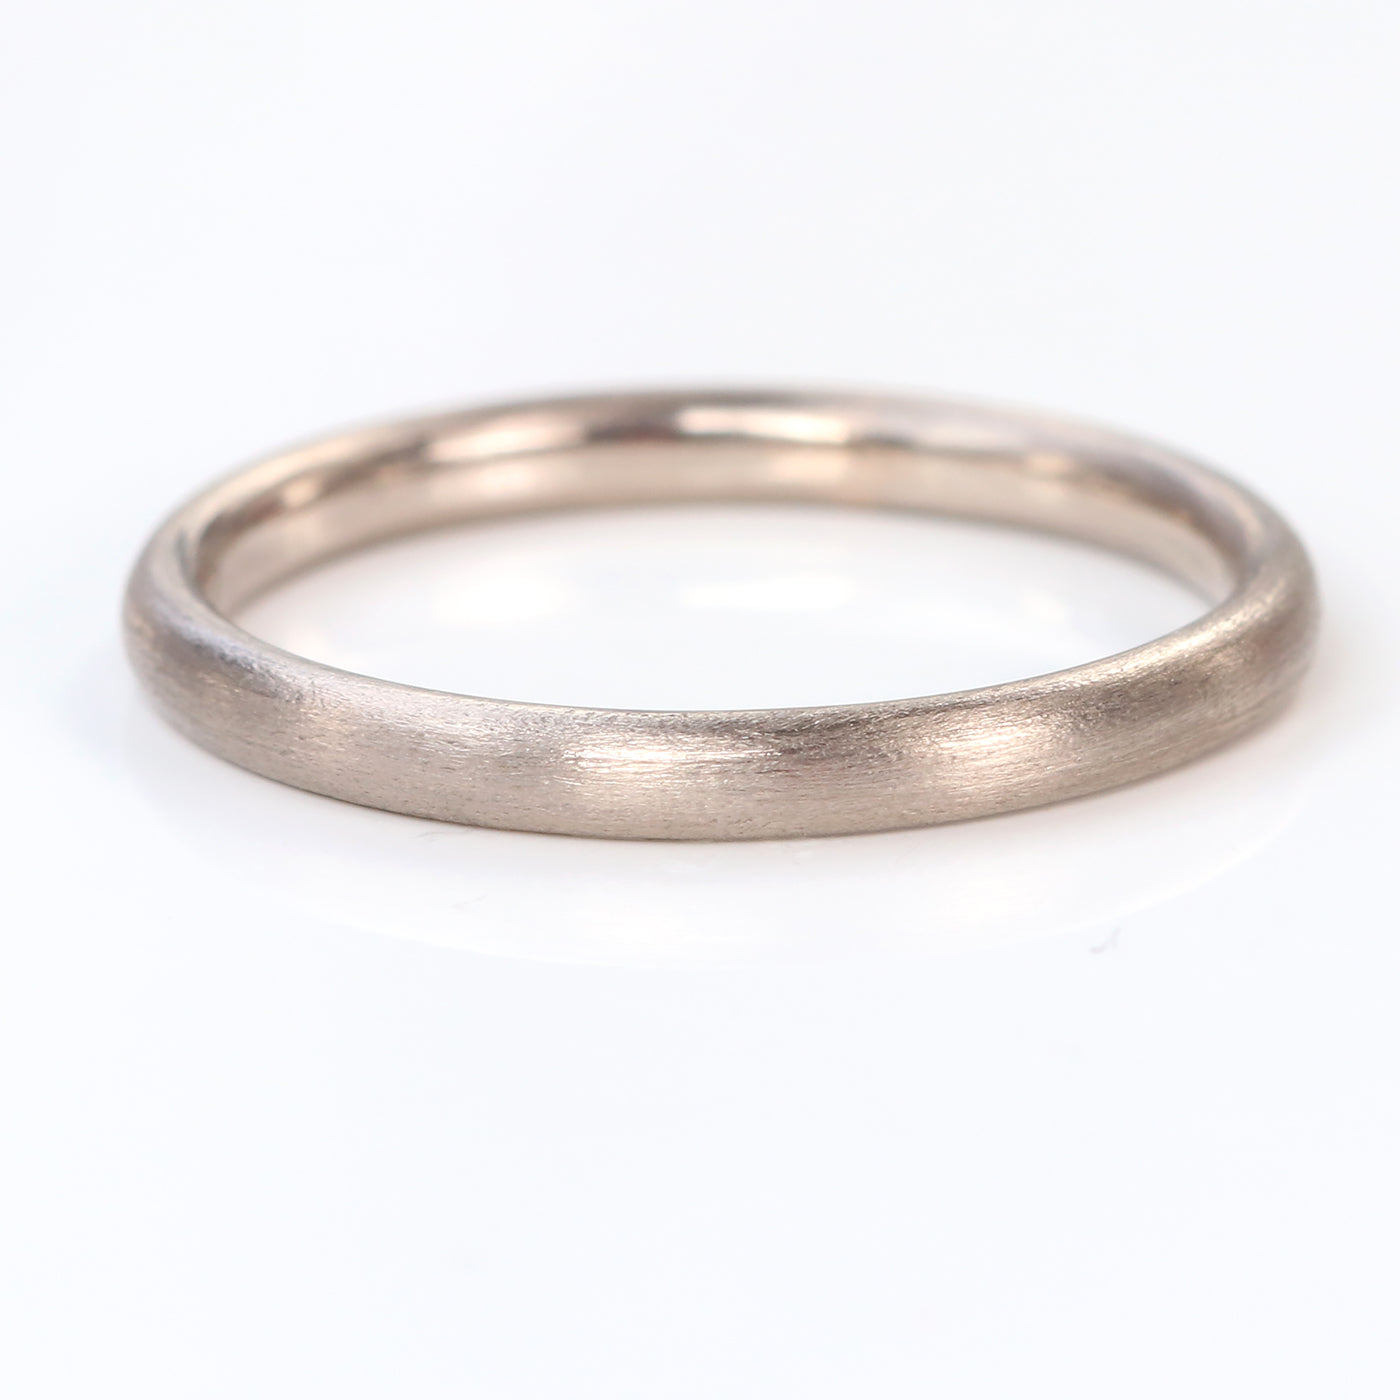 2mm comfort fit wedding ring white gold